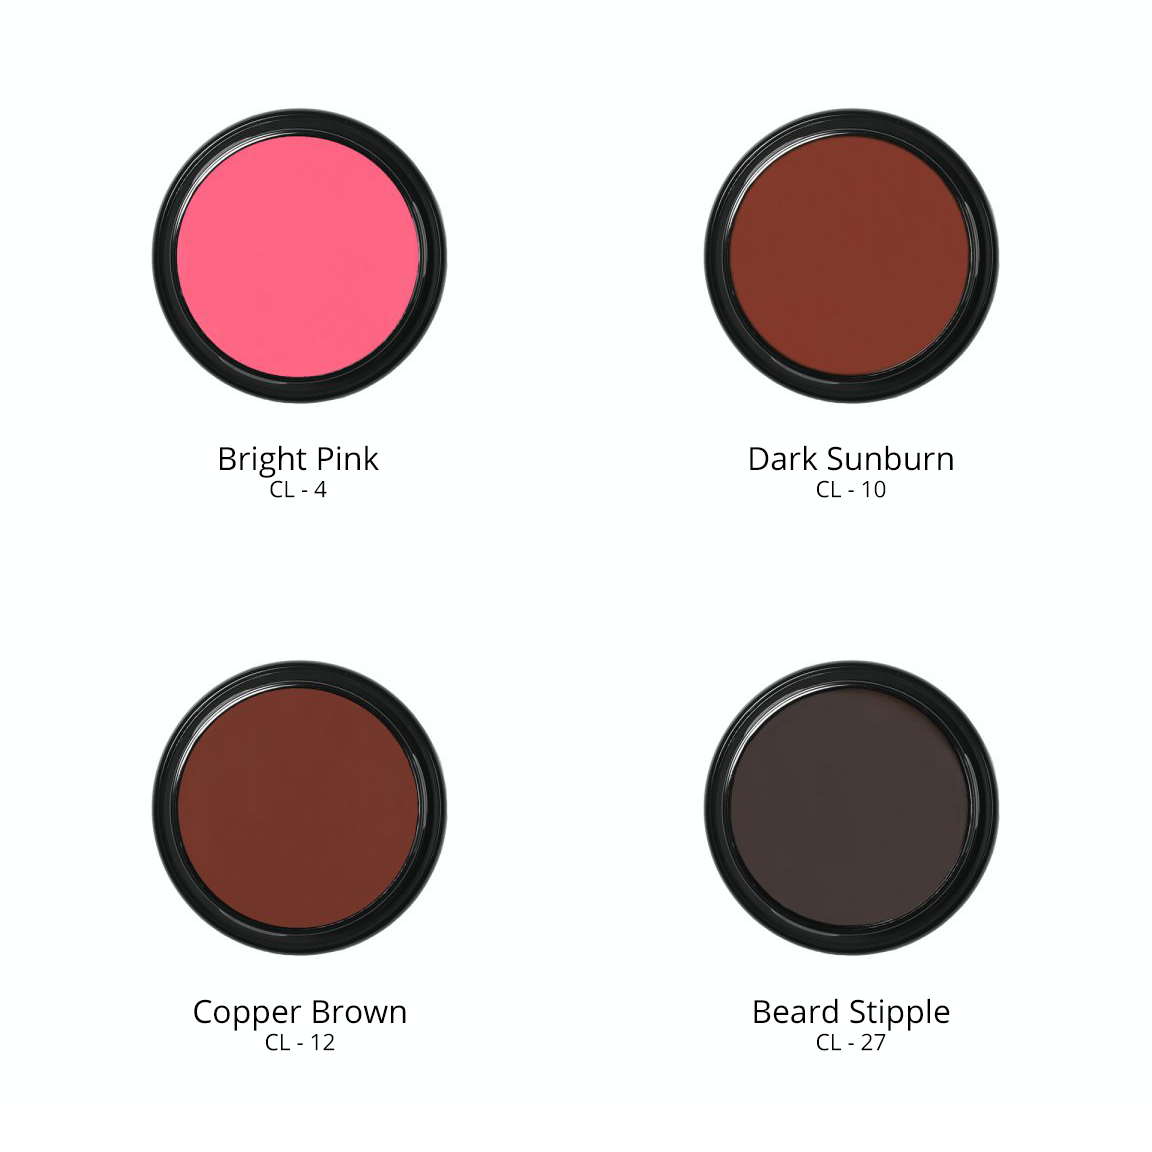 Ben Nye Creme Colors in Bright Pink CL - 4, Dark Sunburn CL - 10, Copper Brown CL - 12, and Beard Stipple CL - 27.